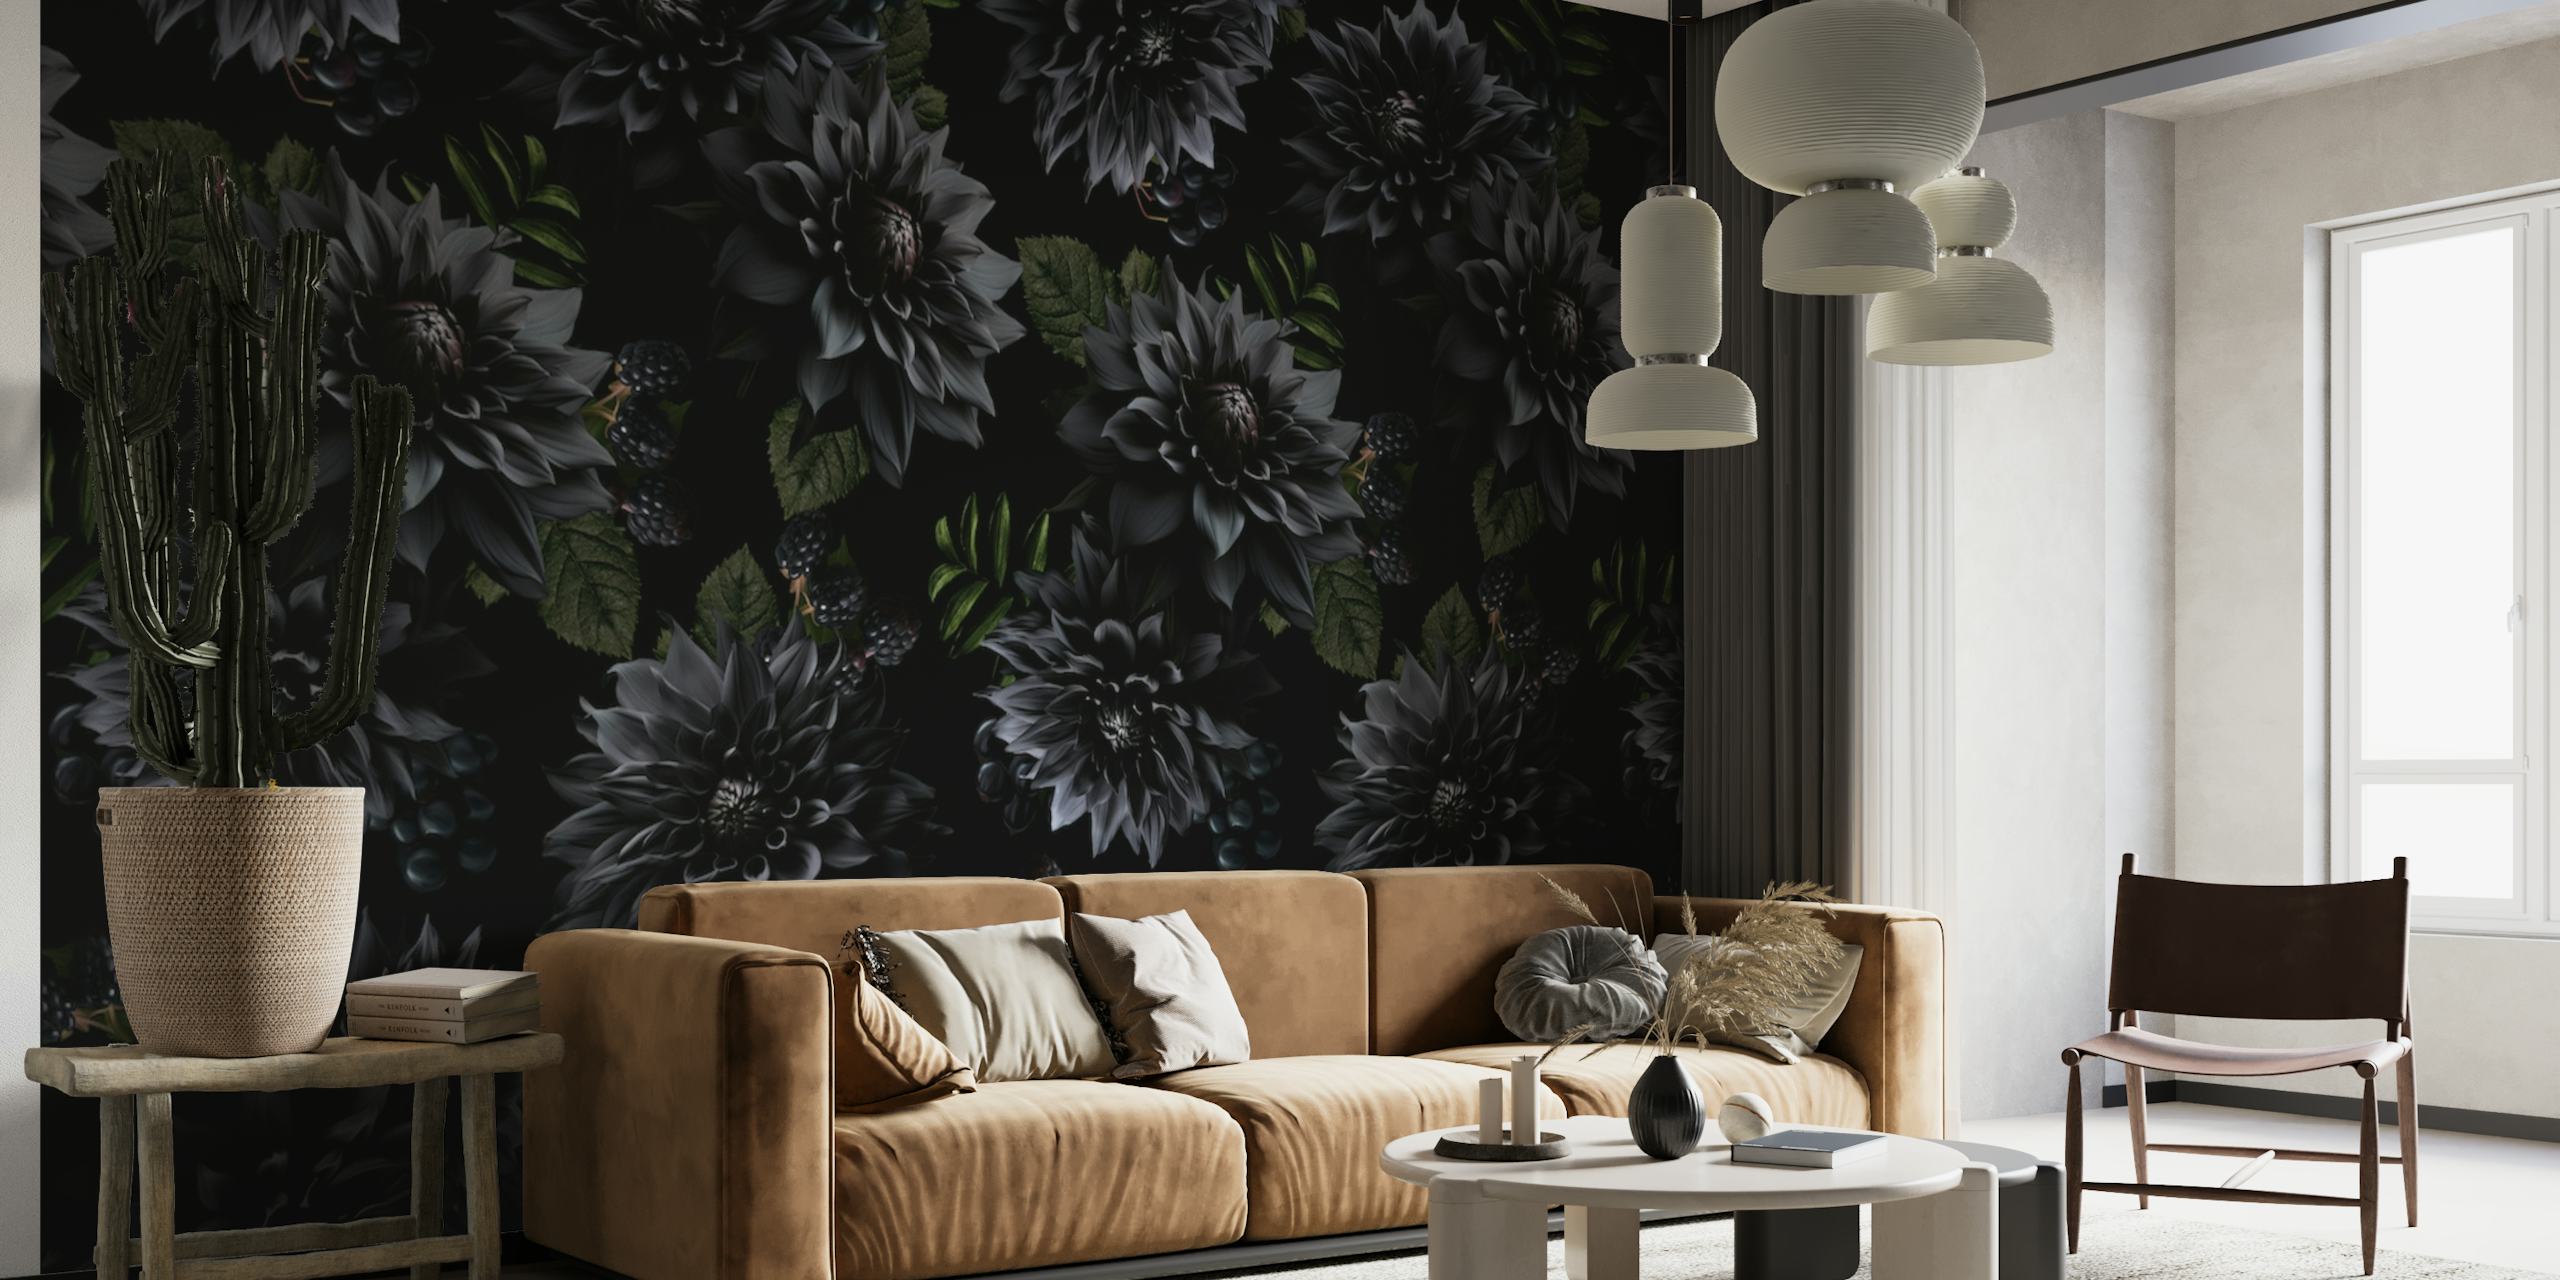 Black and grey gothic style floral pattern wall mural for a mysterious night garden ambiance